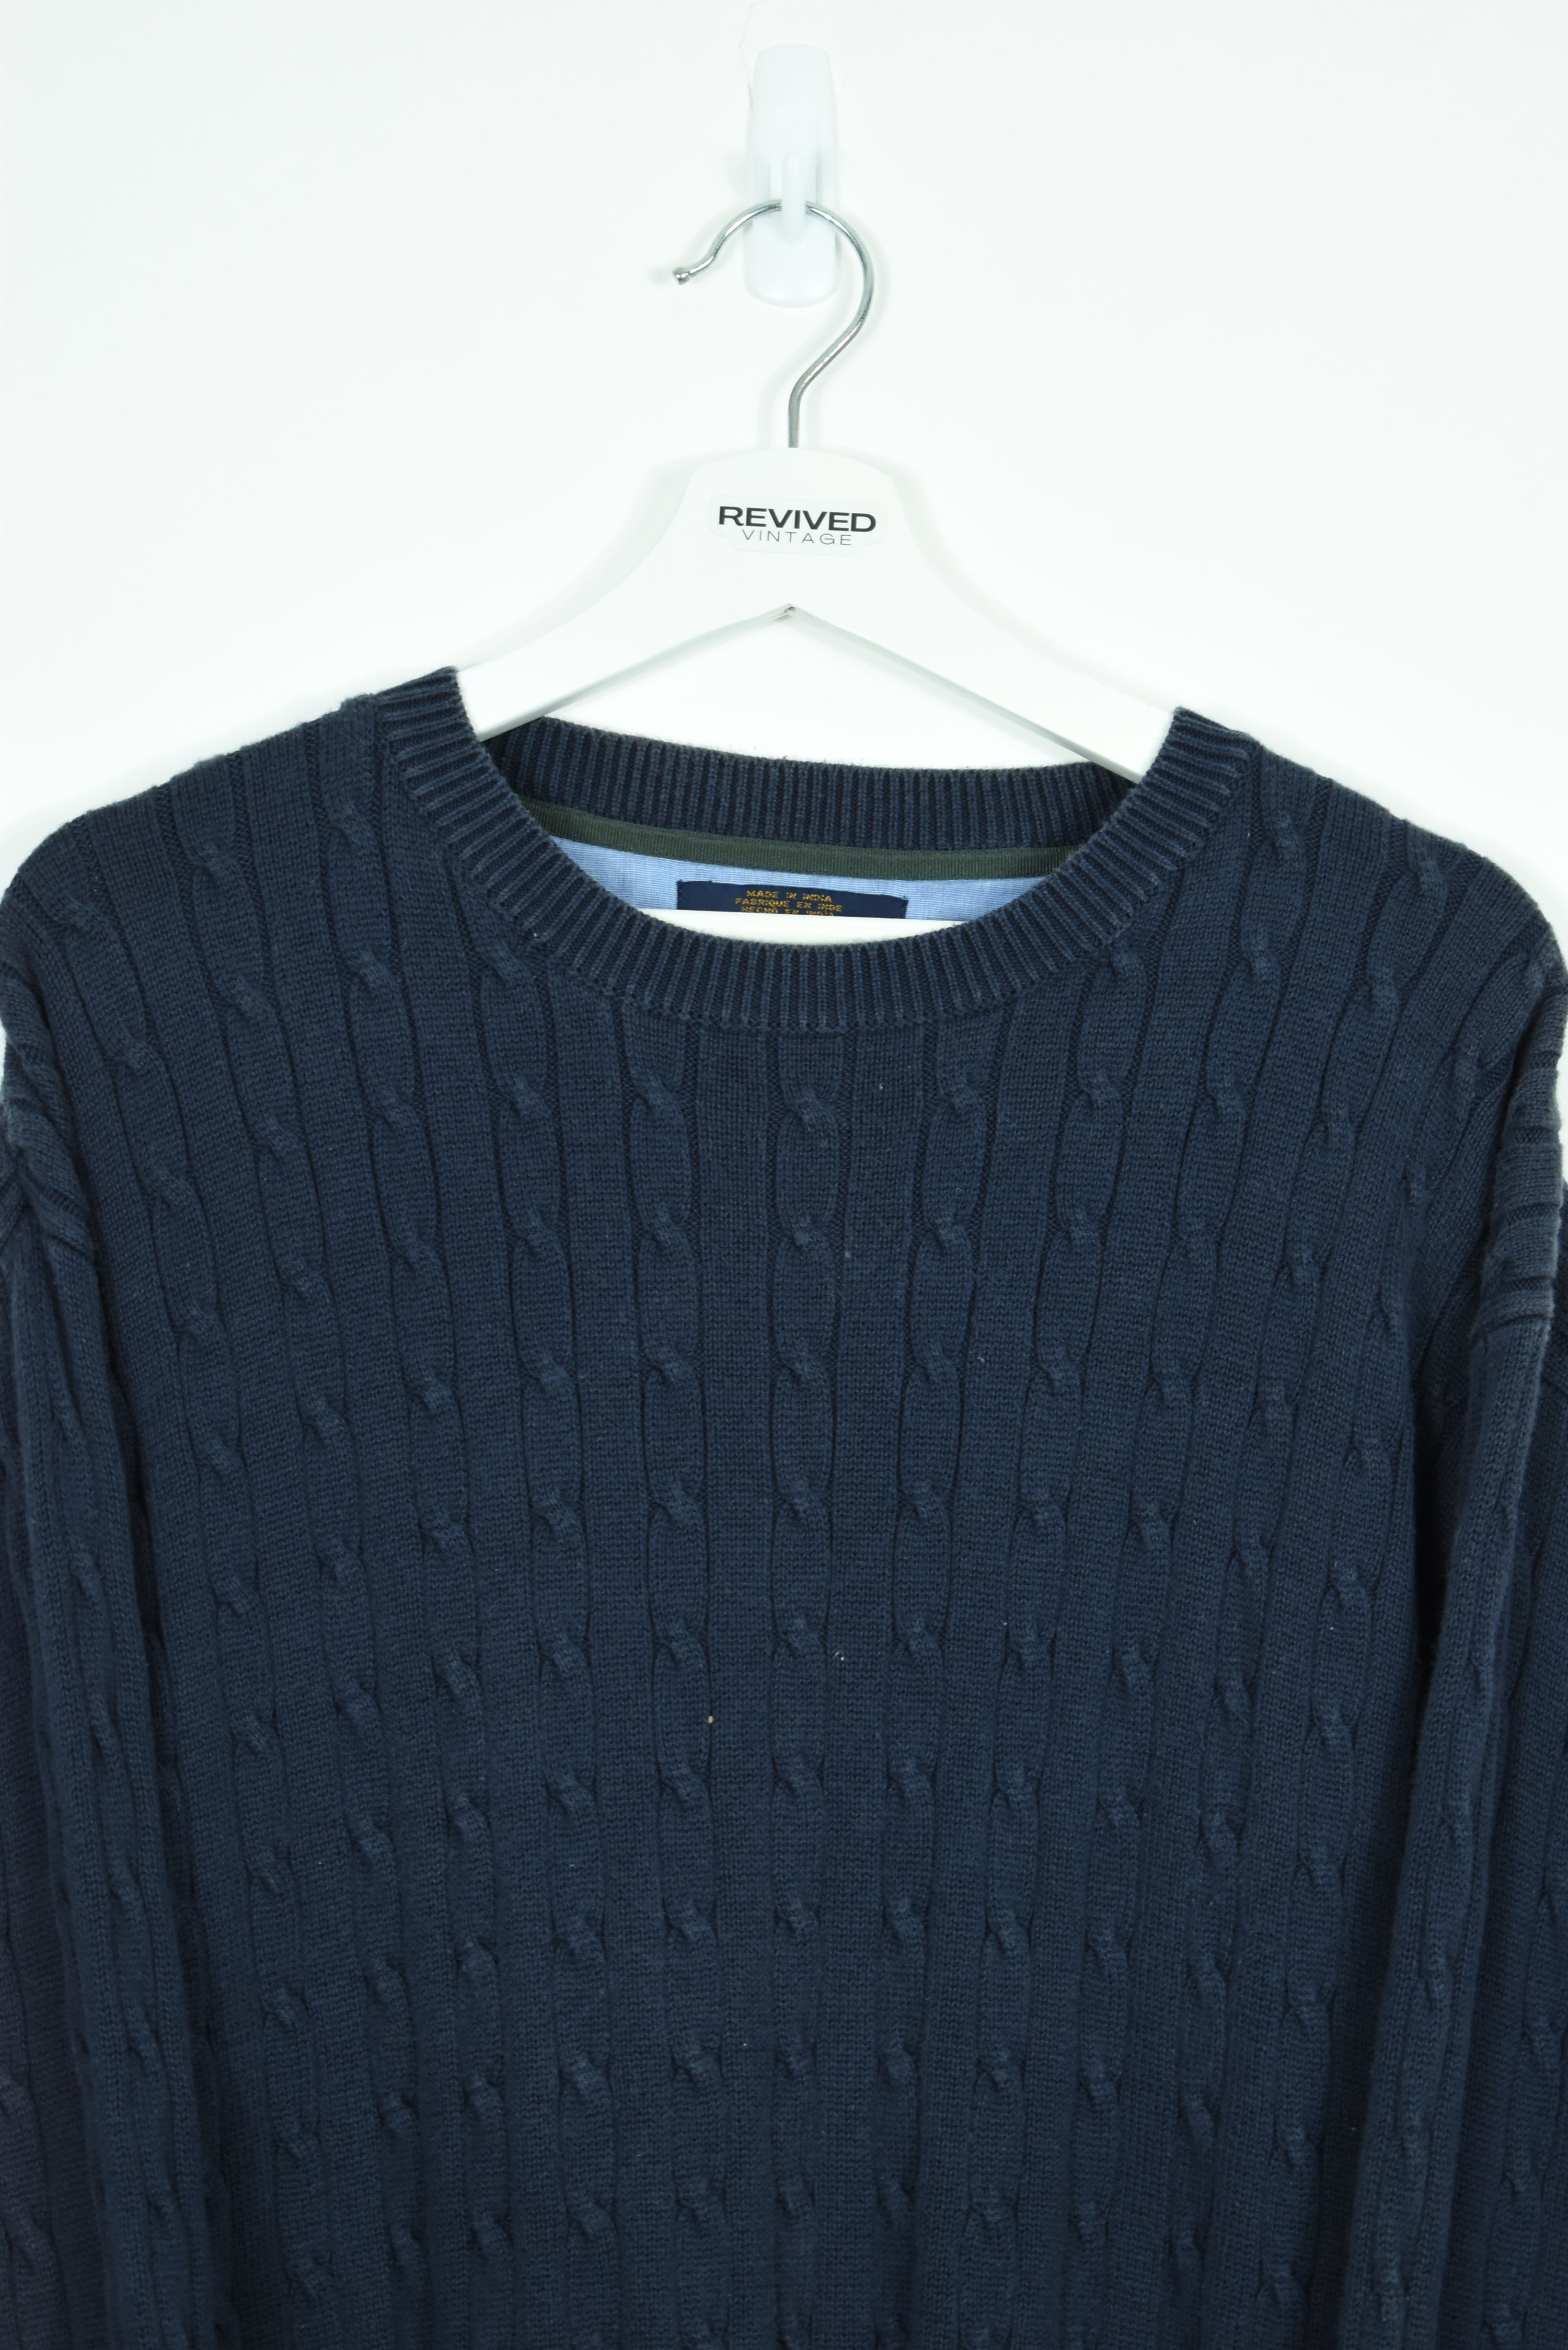 VINTAGE TOMMY HILFIGER NAVY EMBROIDERY SWEATER LARGE